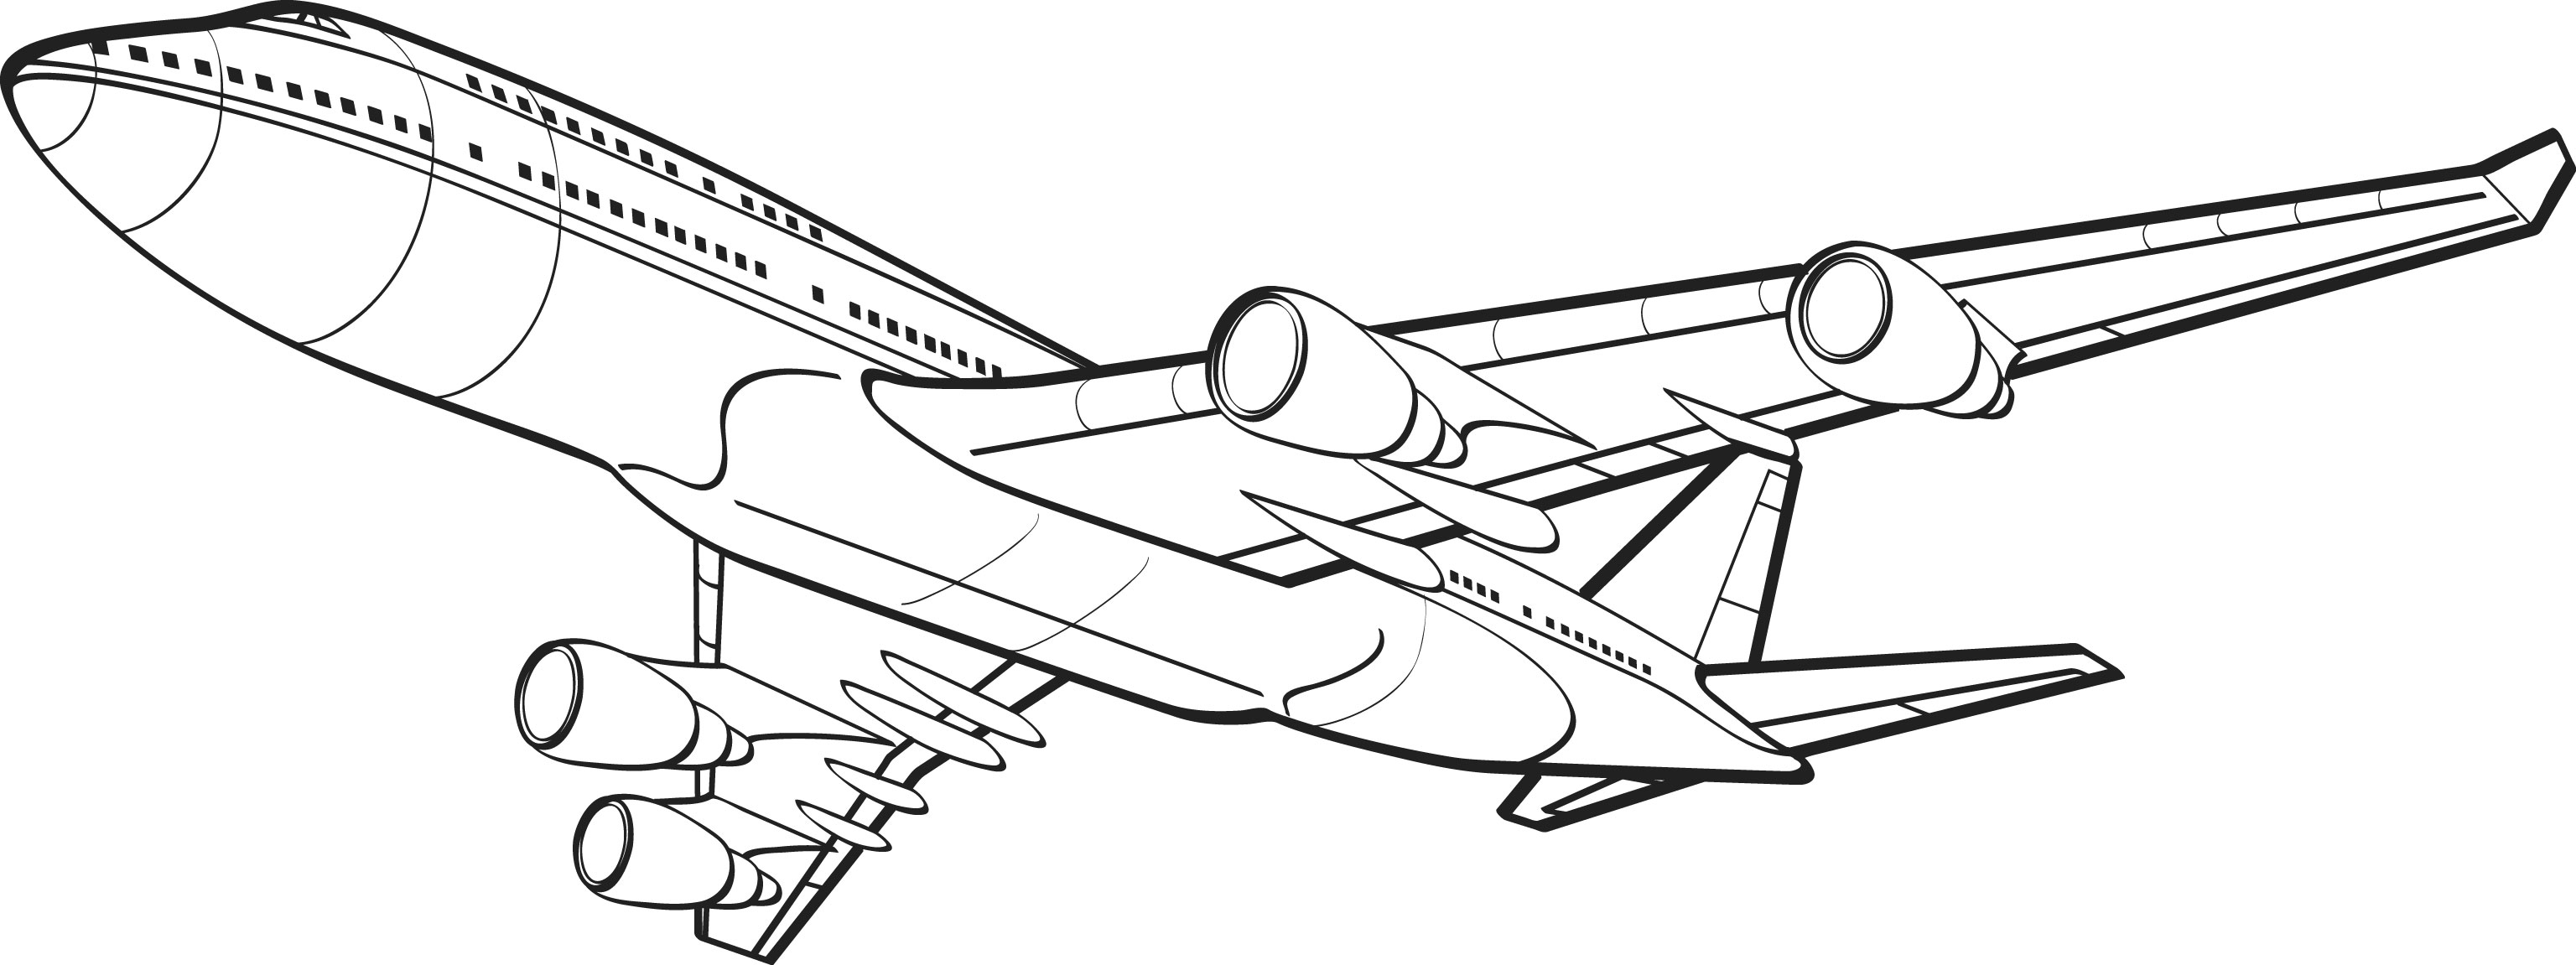 Boeing 747 clipart - Clipground